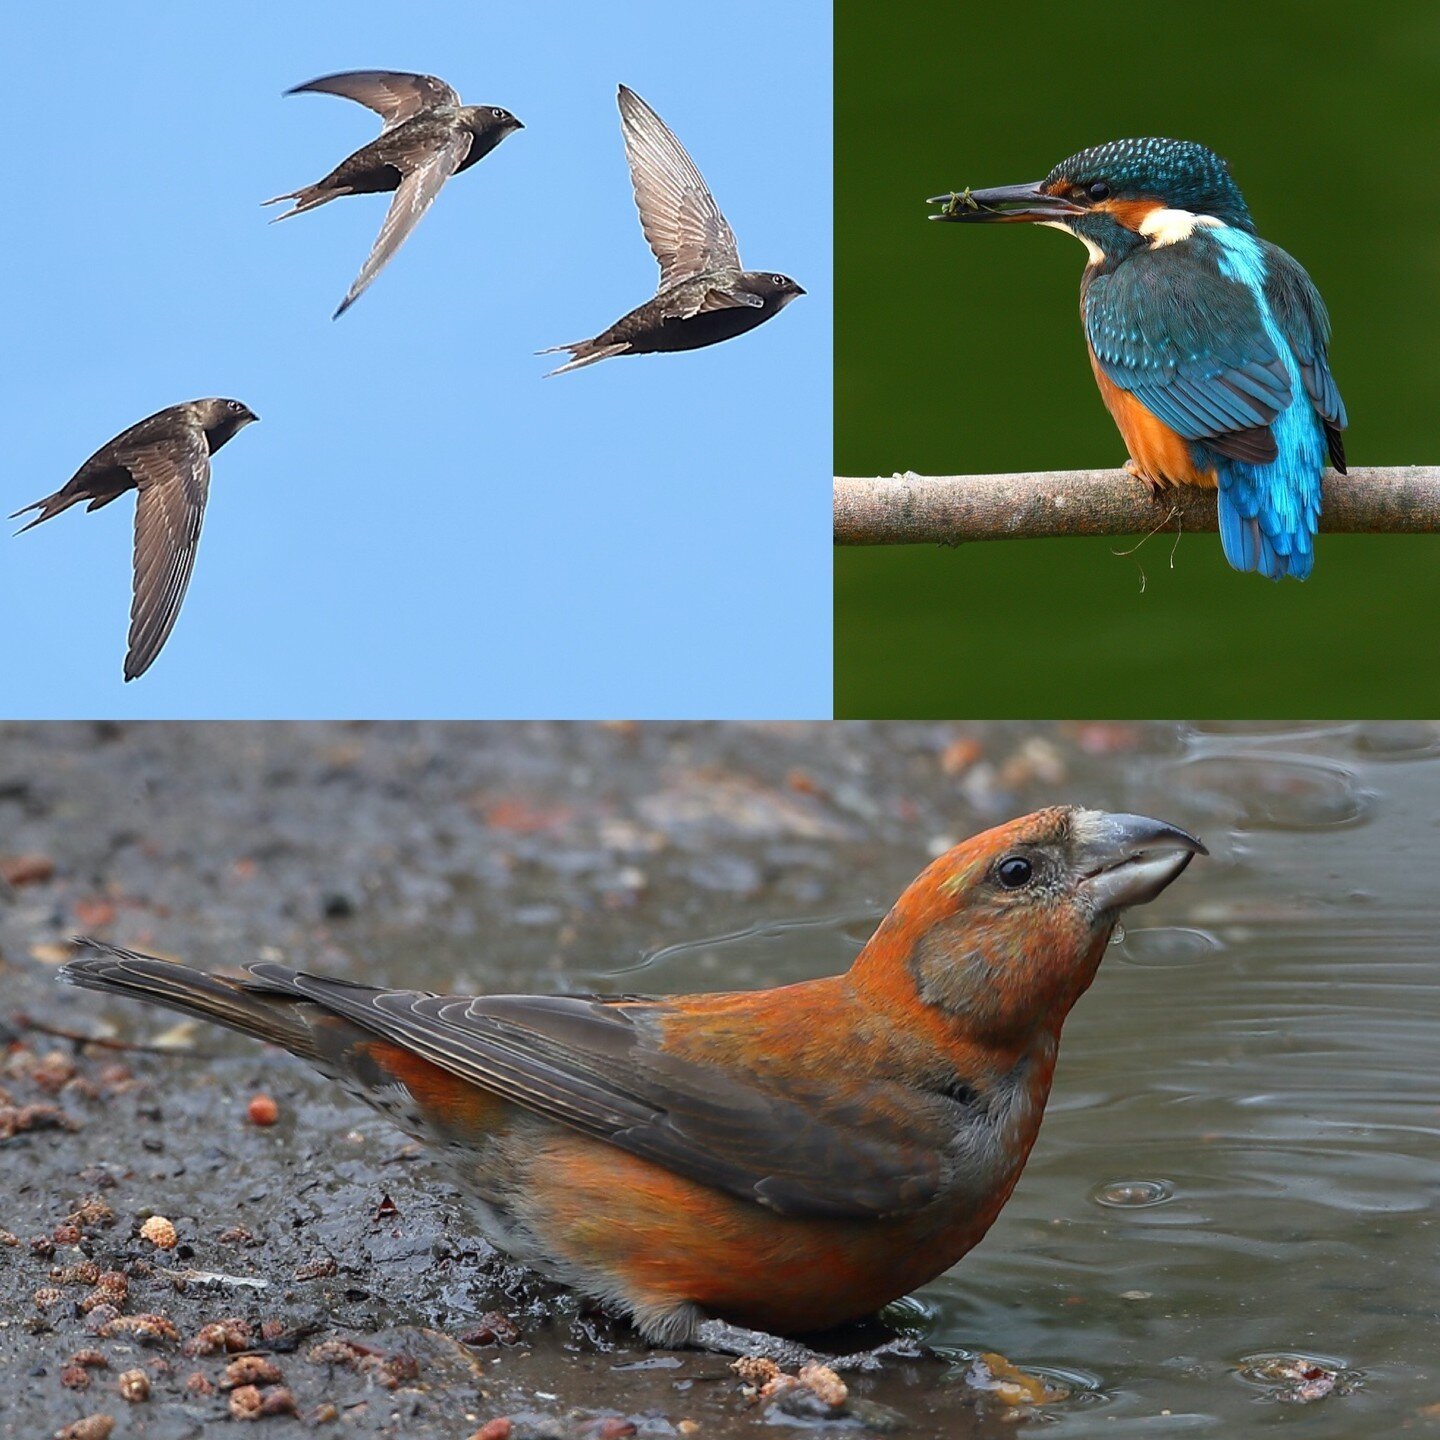 Book your space on the Beginners Bird ID Course 2023 at Bawdsey Hall 
Friday 5th May- Sunday 7th May 2023

https://bookwhen.com/bawdseyhallcourses

#wildlife #nature  #birds  #naturelovers #animal #wild #photooftheday #birdsofinstagram #birdphotograp